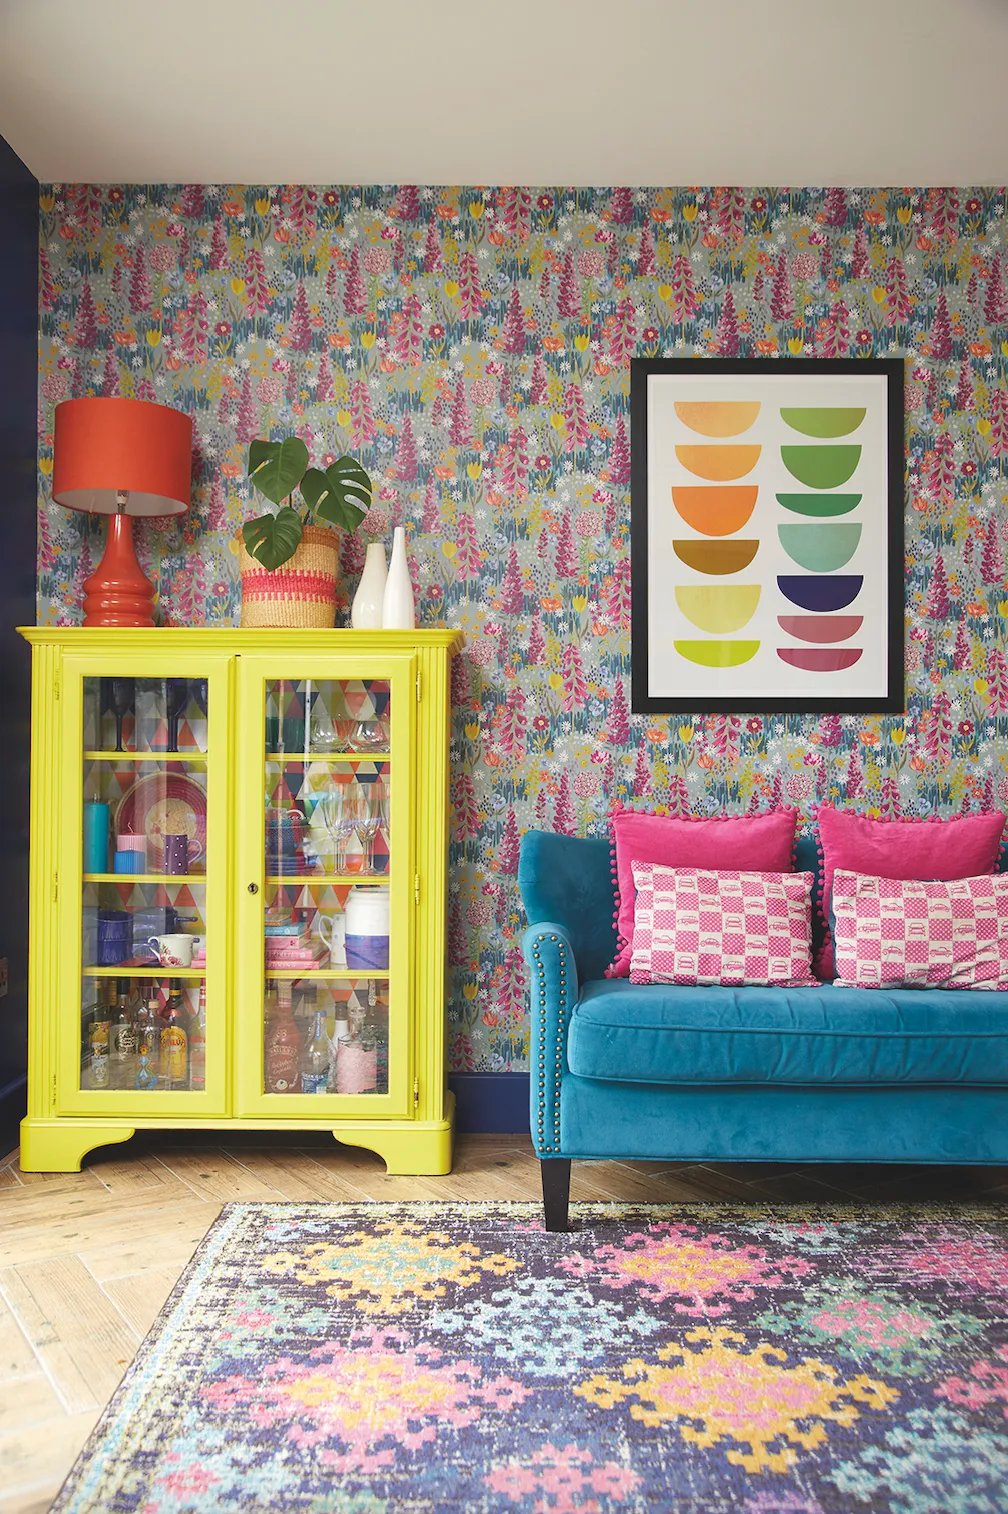 Home makeover: 'My home is bold and bright'